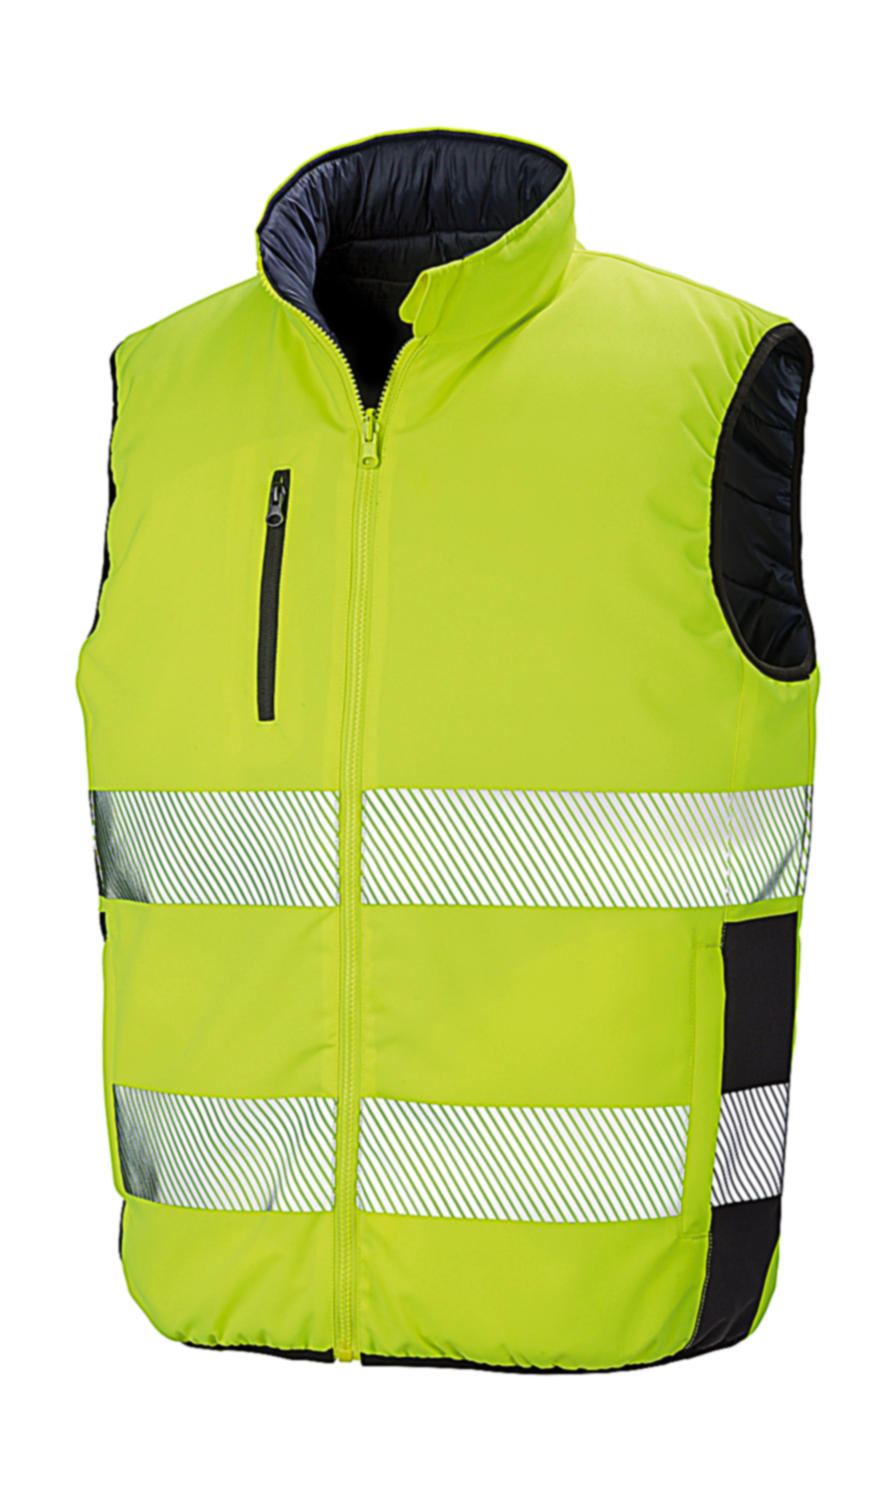  Reversible Soft Padded Safety Gilet in Farbe Fluo Yellow/Navy